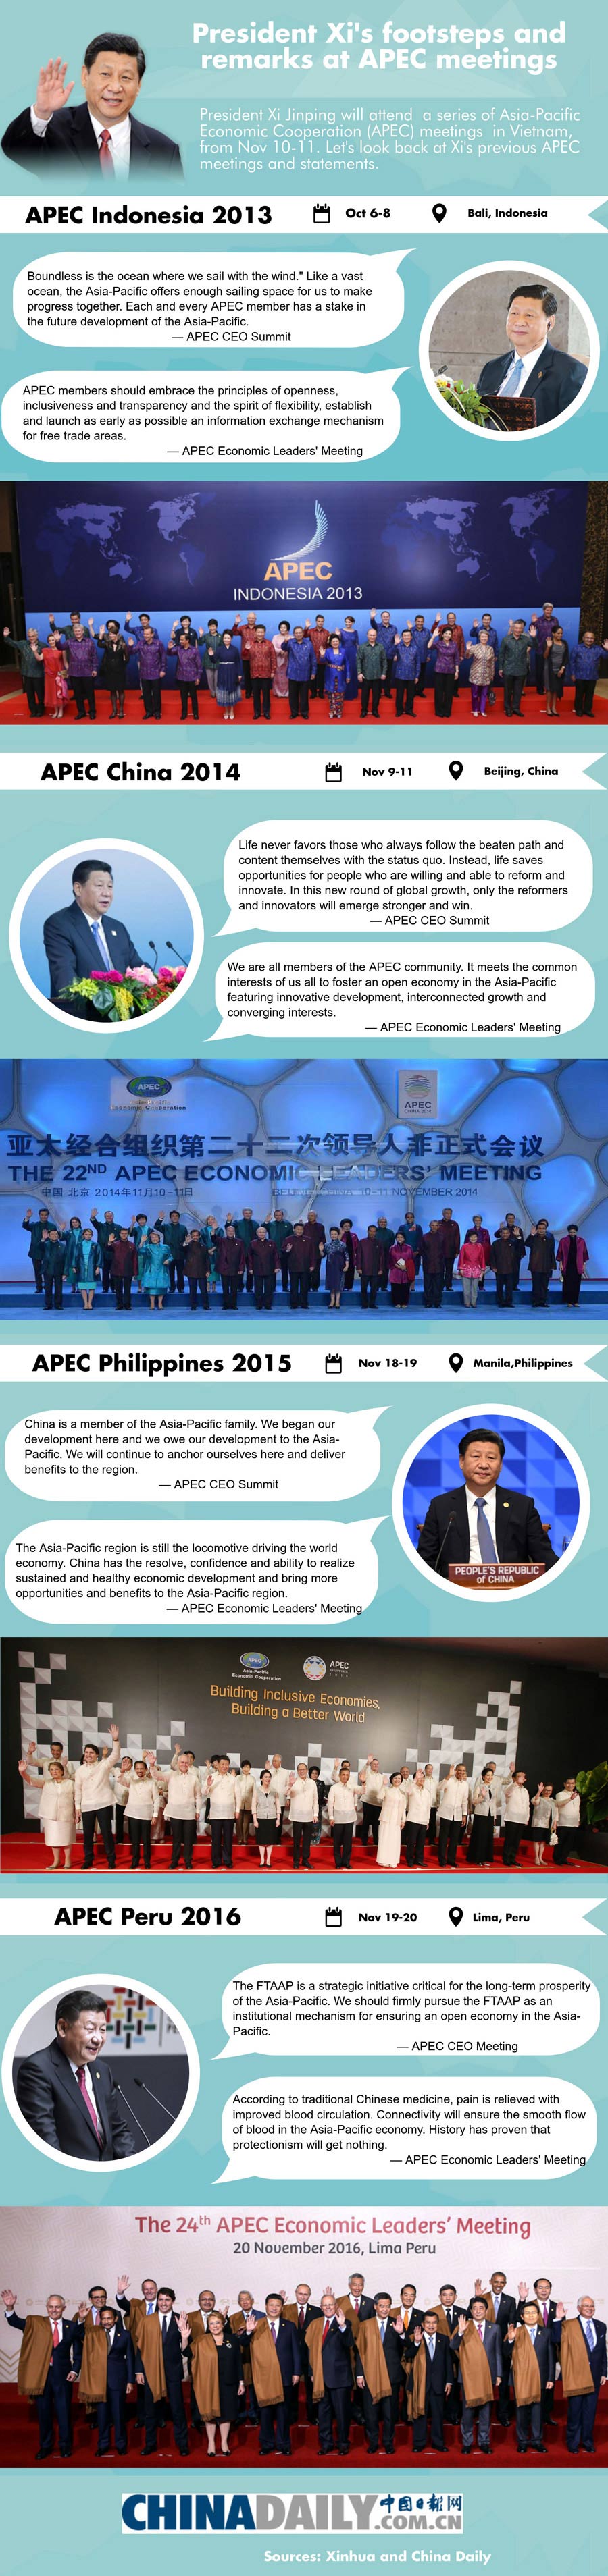 President Xi's footsteps and remarks at APEC meetings